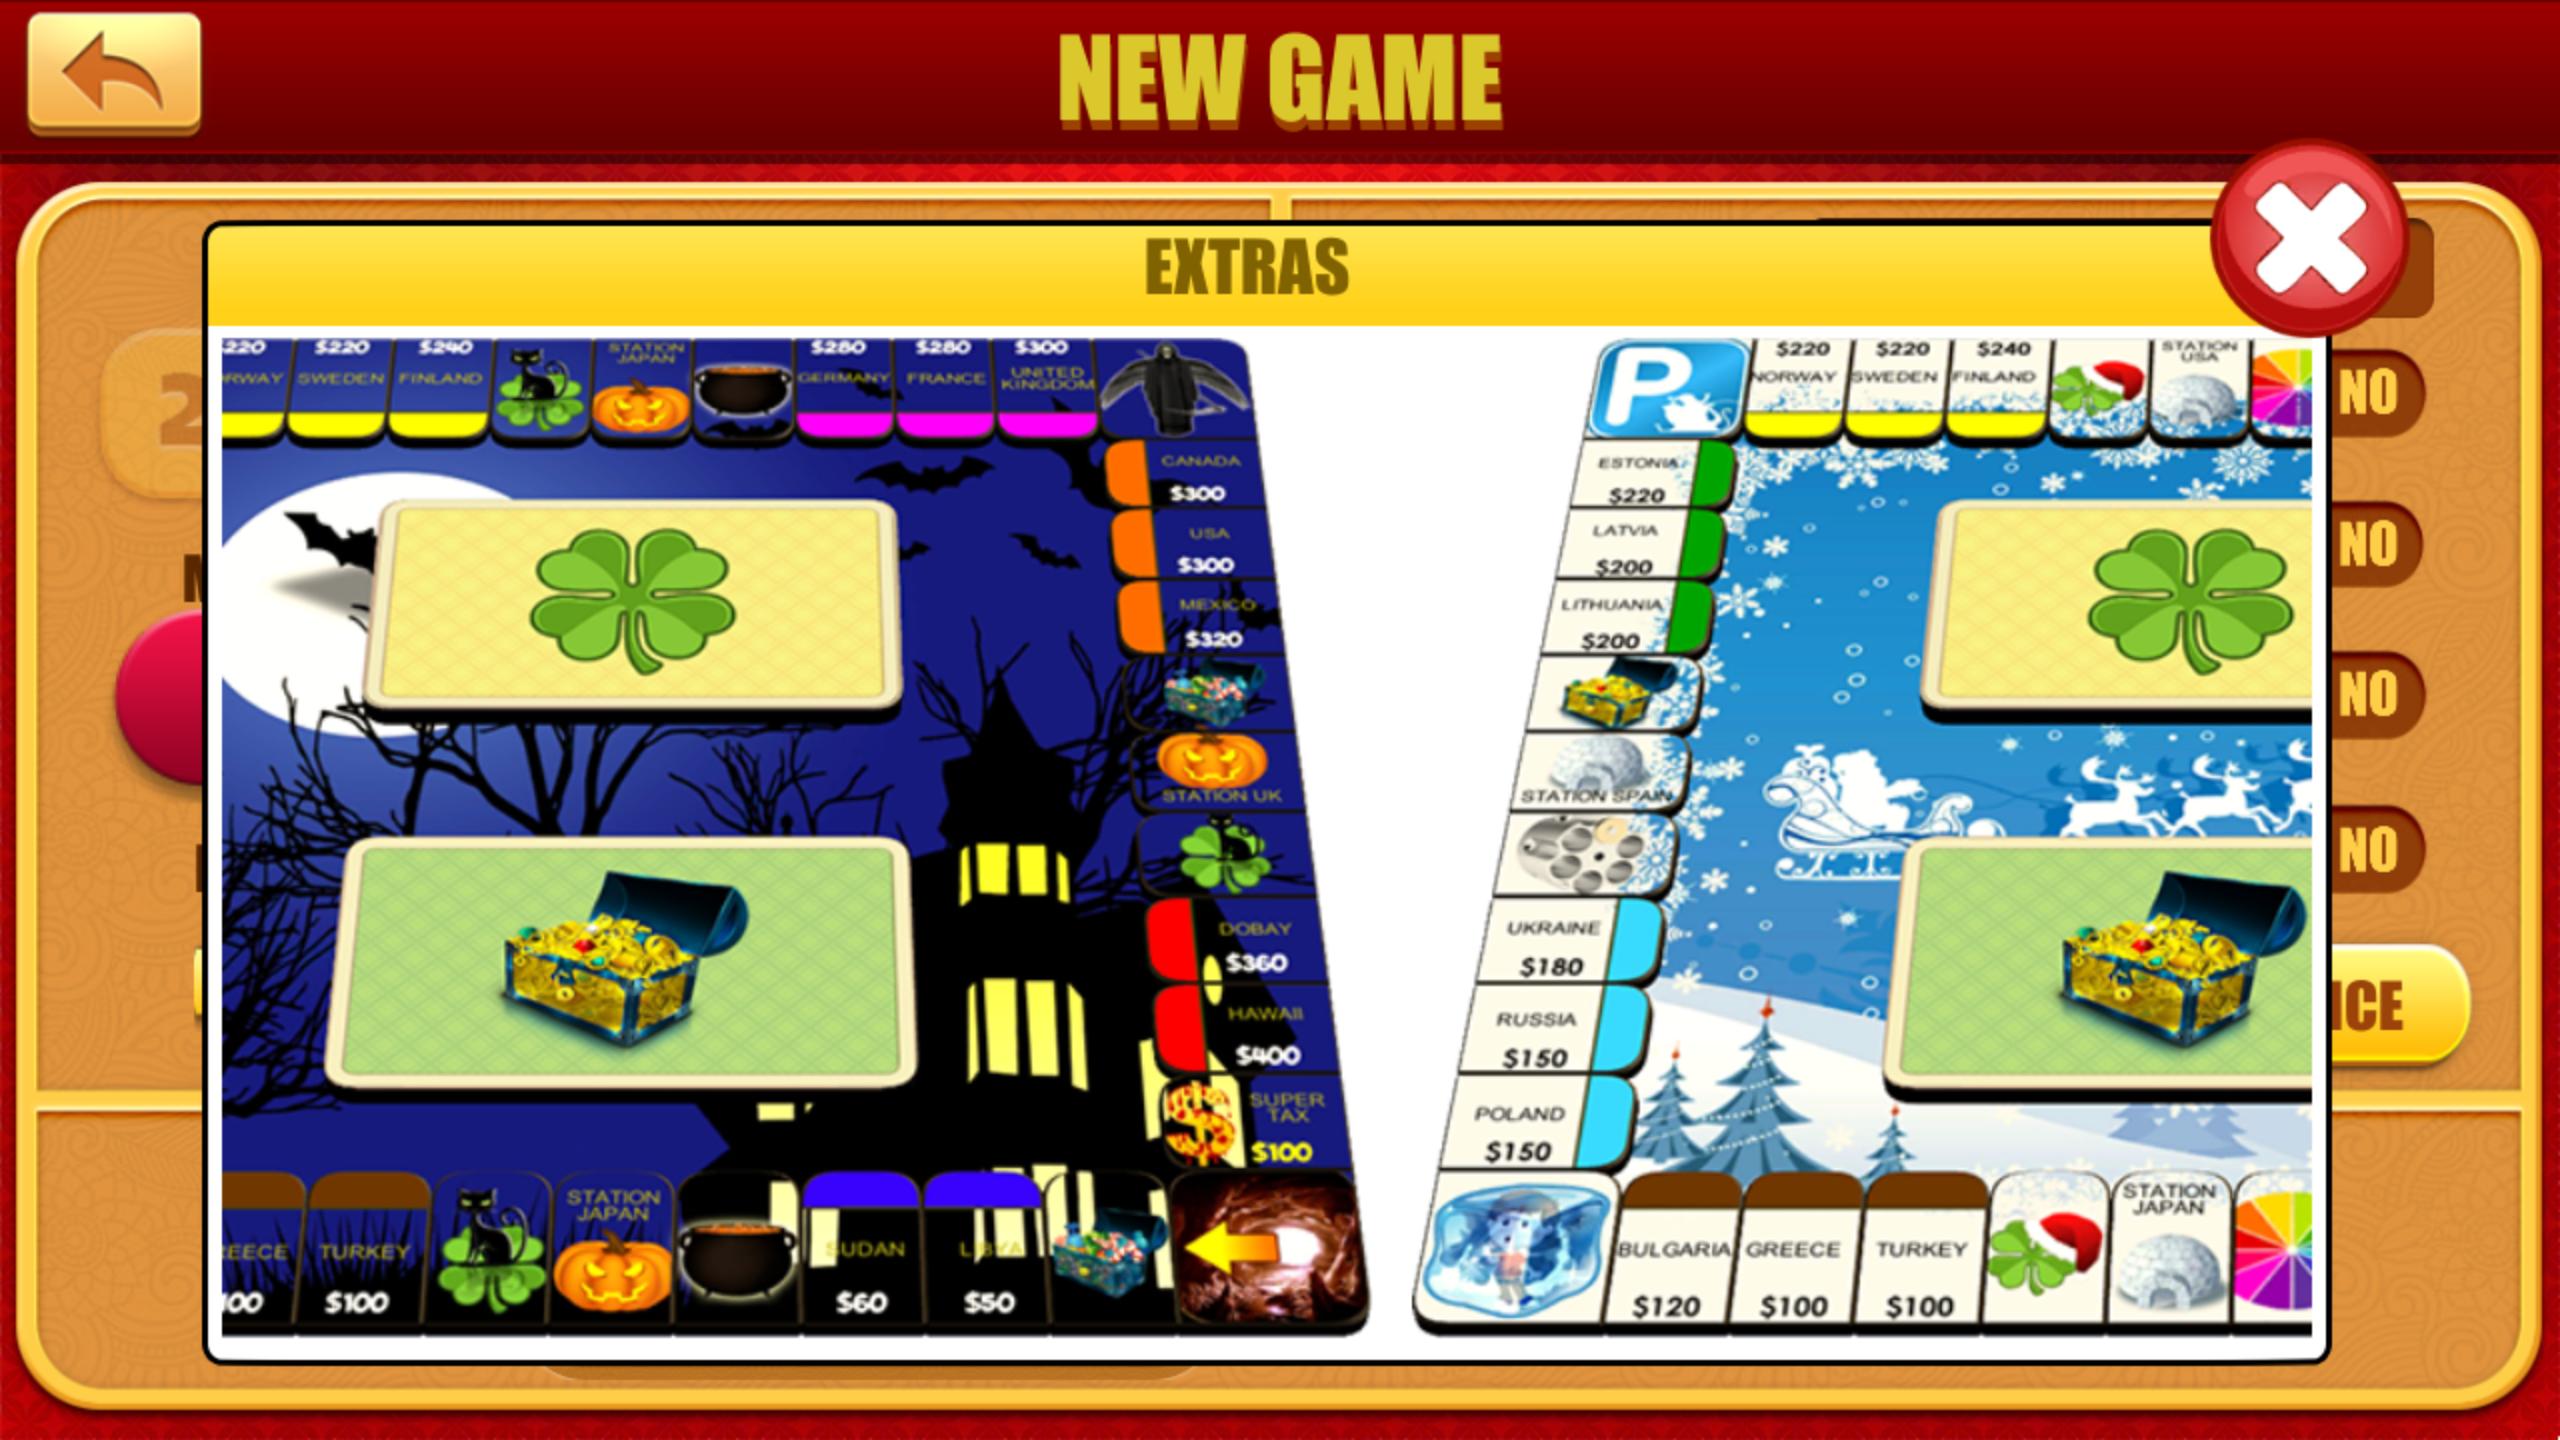 Rento - Dice Board Game Online for Android - APK Download2560 x 1440